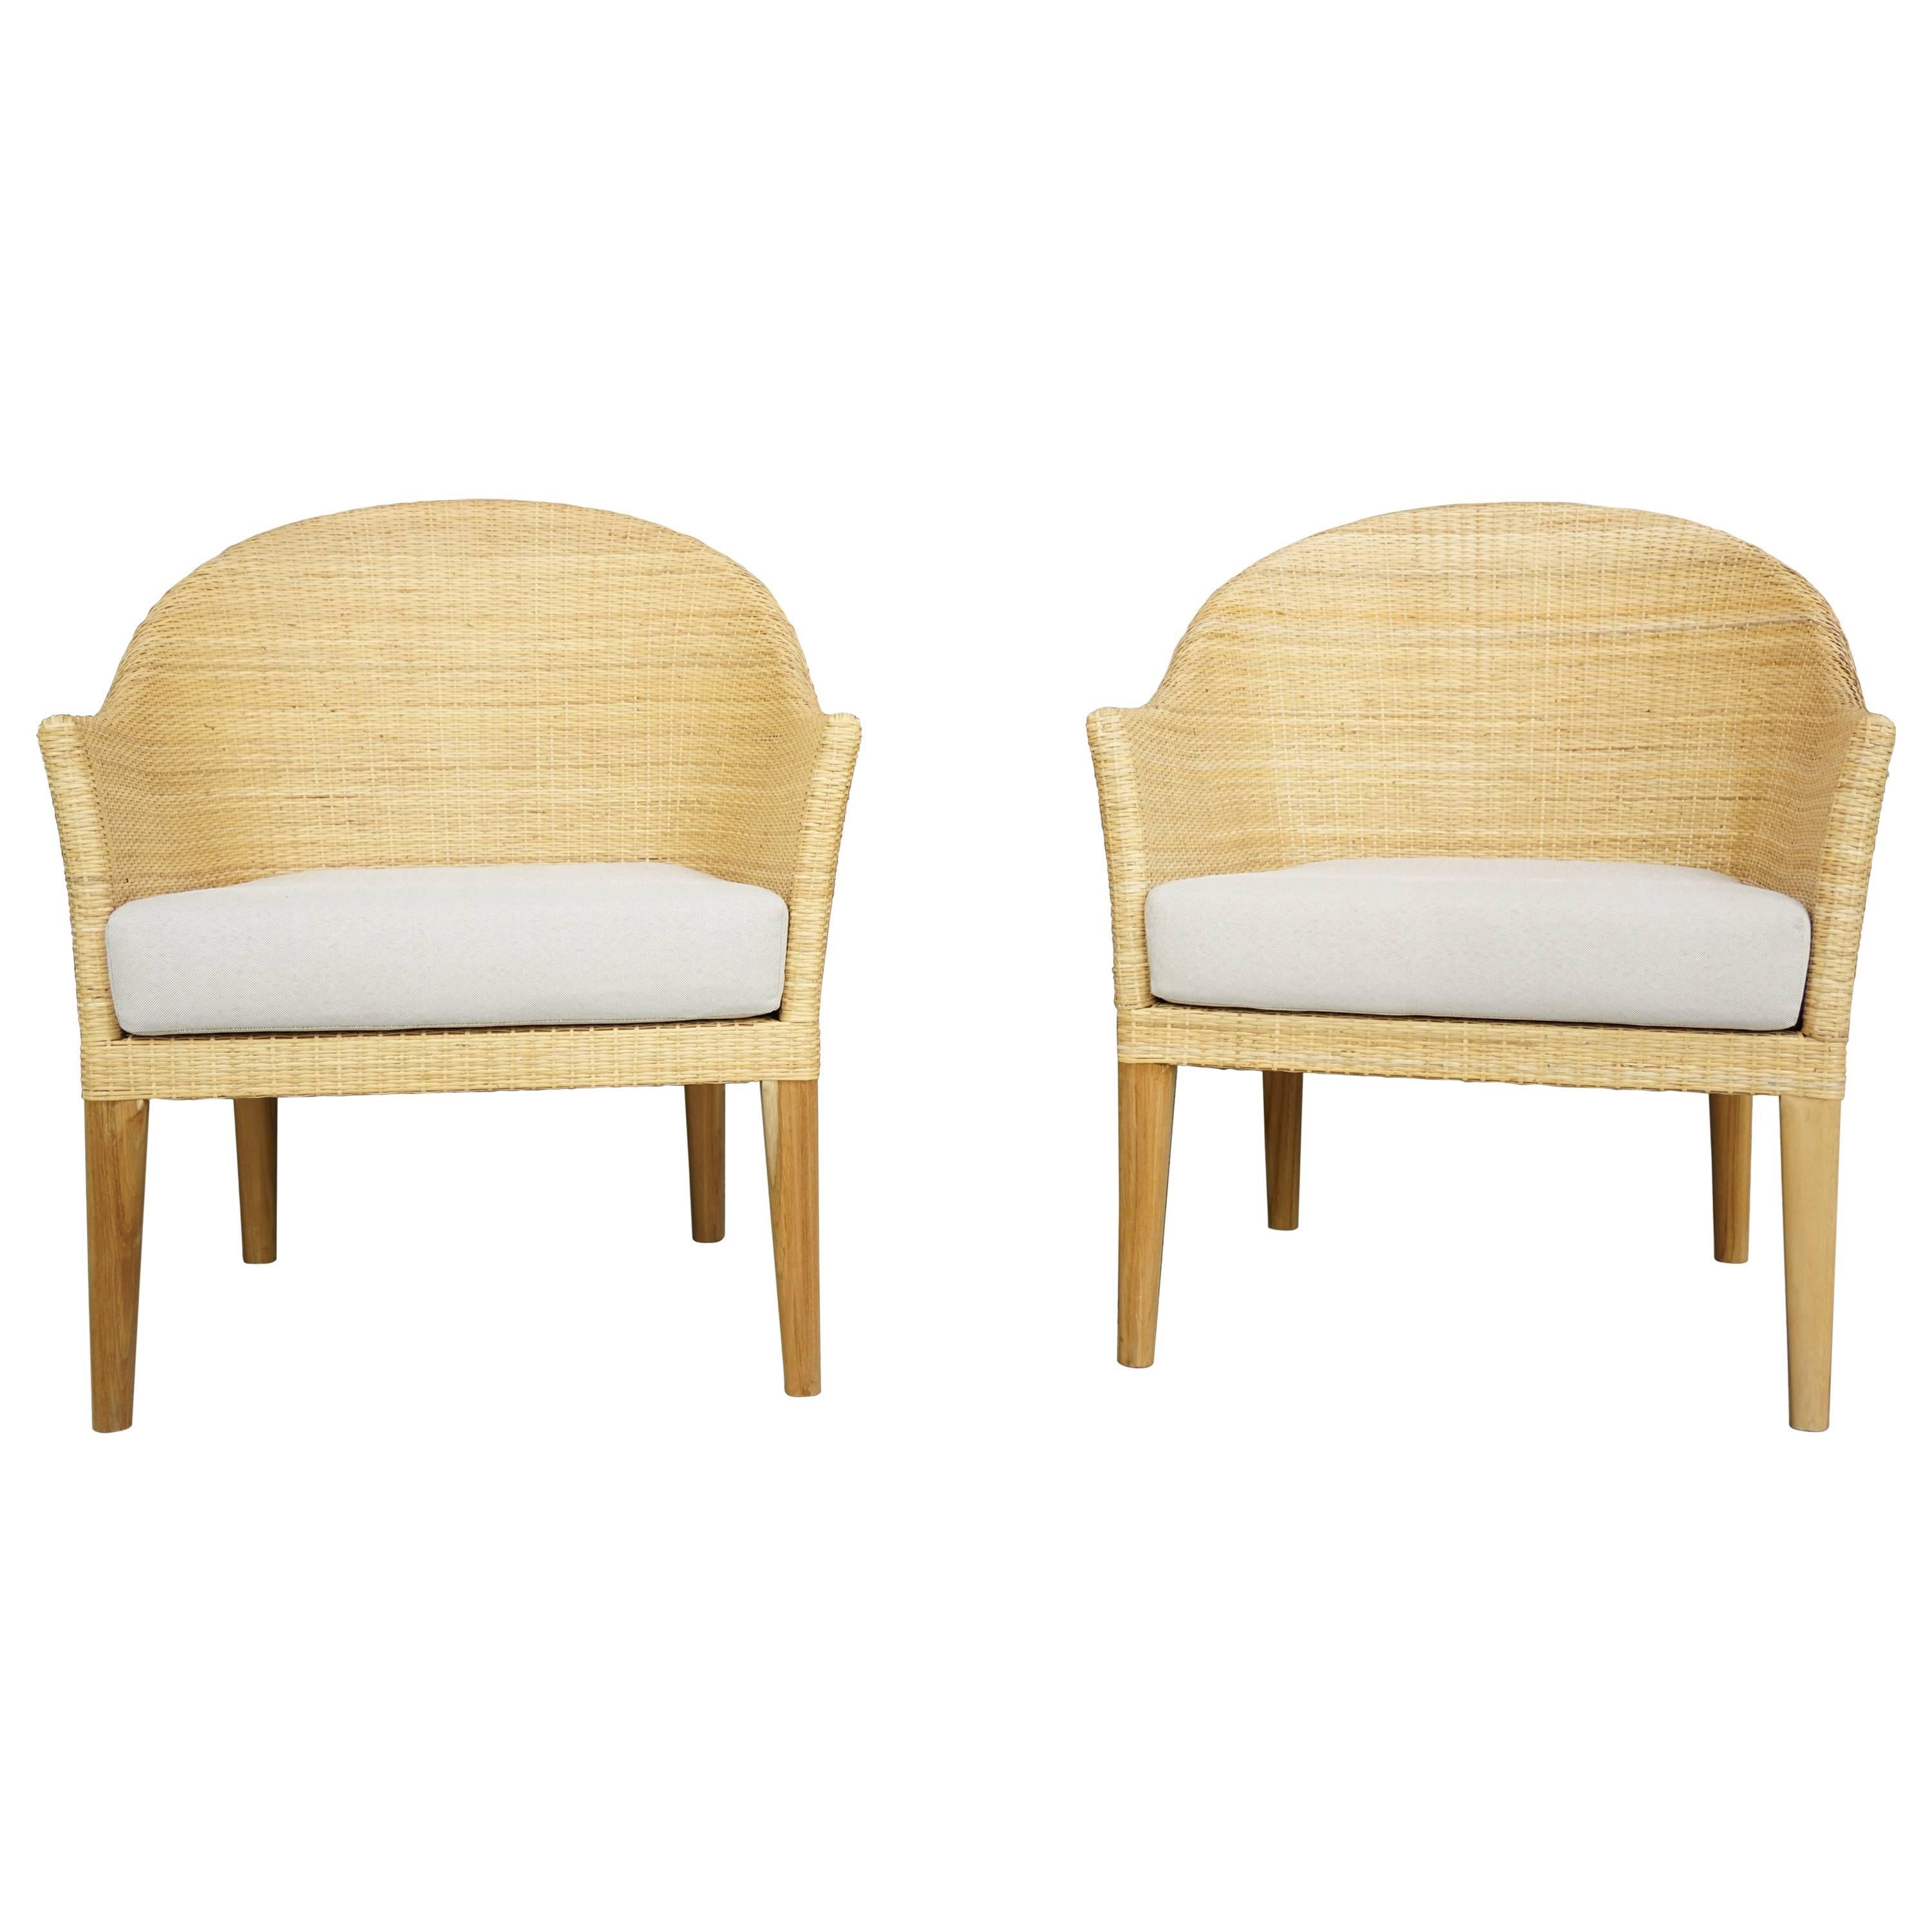 Teak Wooden And Rattan Armchairs French Design